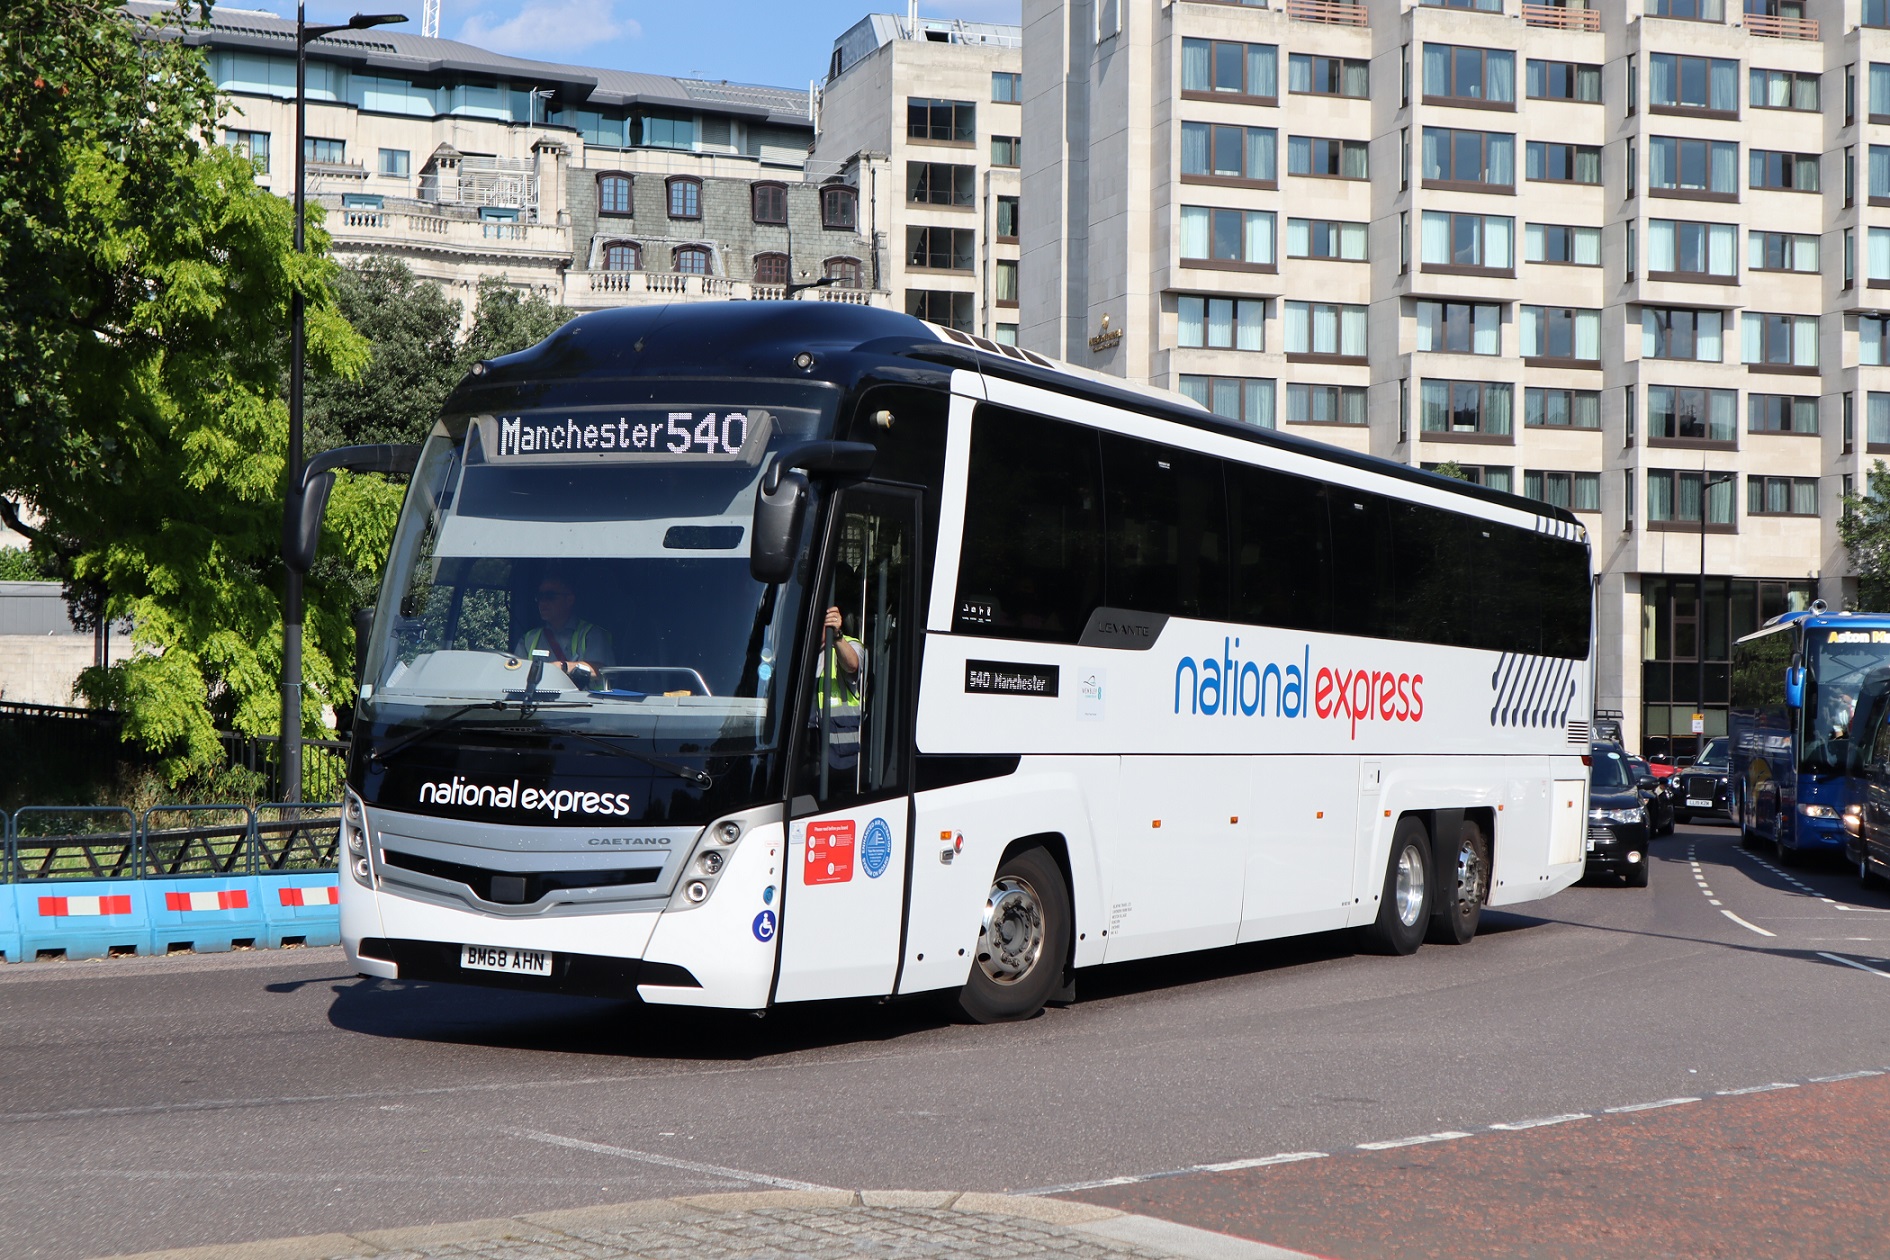 Tom Stables and David Bradford leave National Express